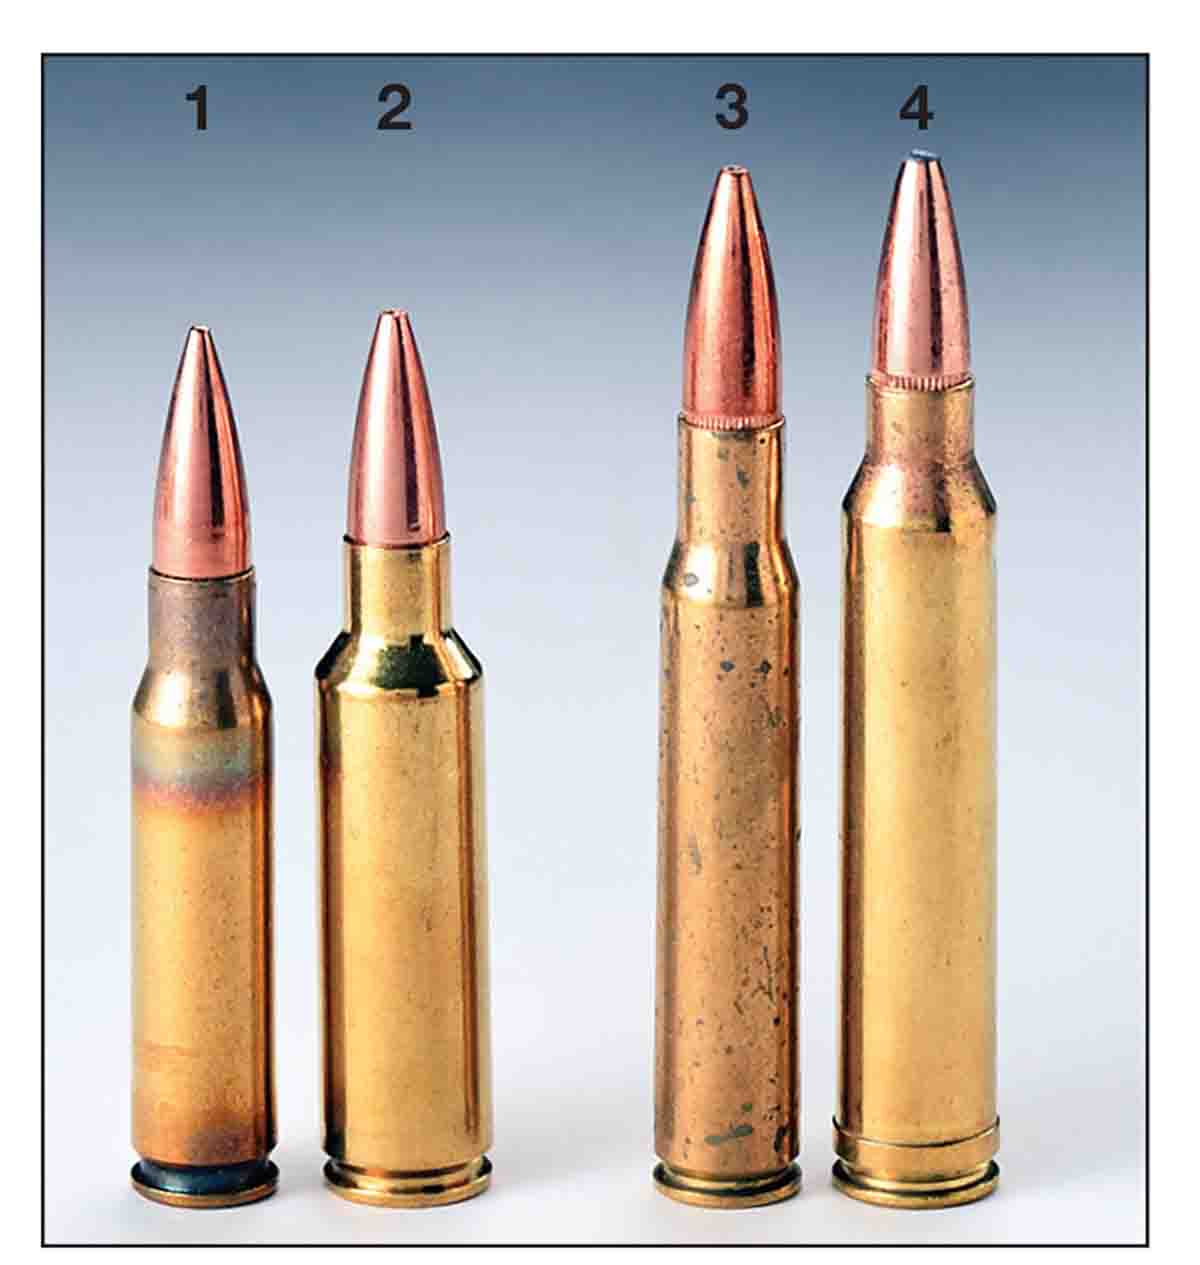 The (1) .308 and (2) .300 WSM were designed for a short action. The latter requires more intrusion into the powder space, but its performance is much greater. The (3) .30-06 and (4) .300 Winchester Magnum require a long action length. In spite of deep bullet seating and a short neck, the .300 Winchester Magnum provides greater performance.